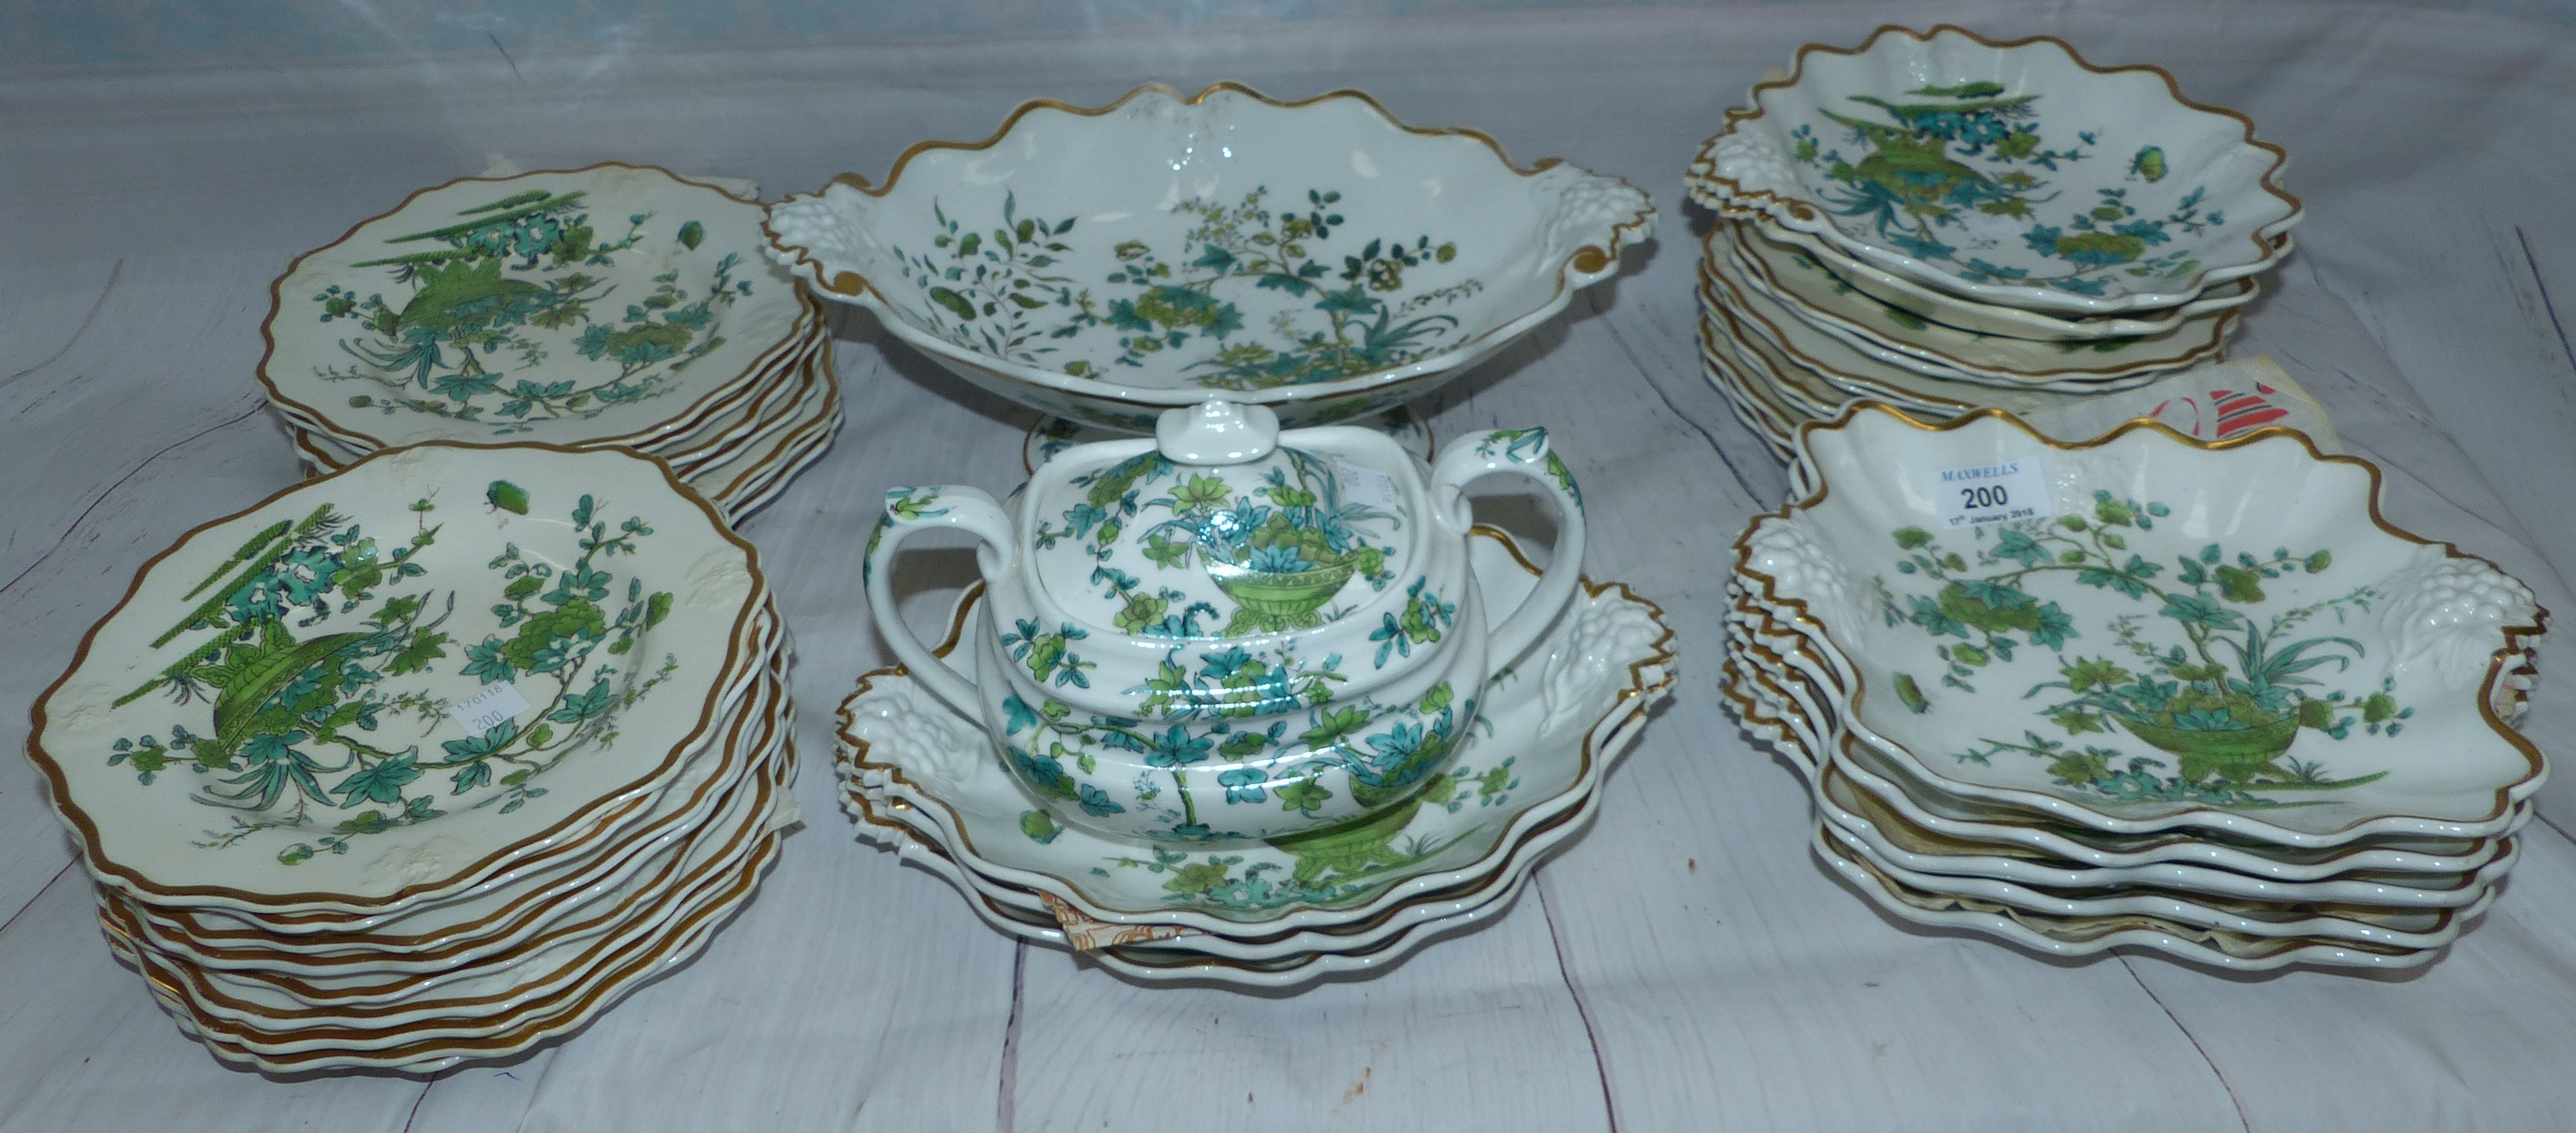 An early 19th century Ridgway dessert service, hand painted in green with flowers in the Chinese